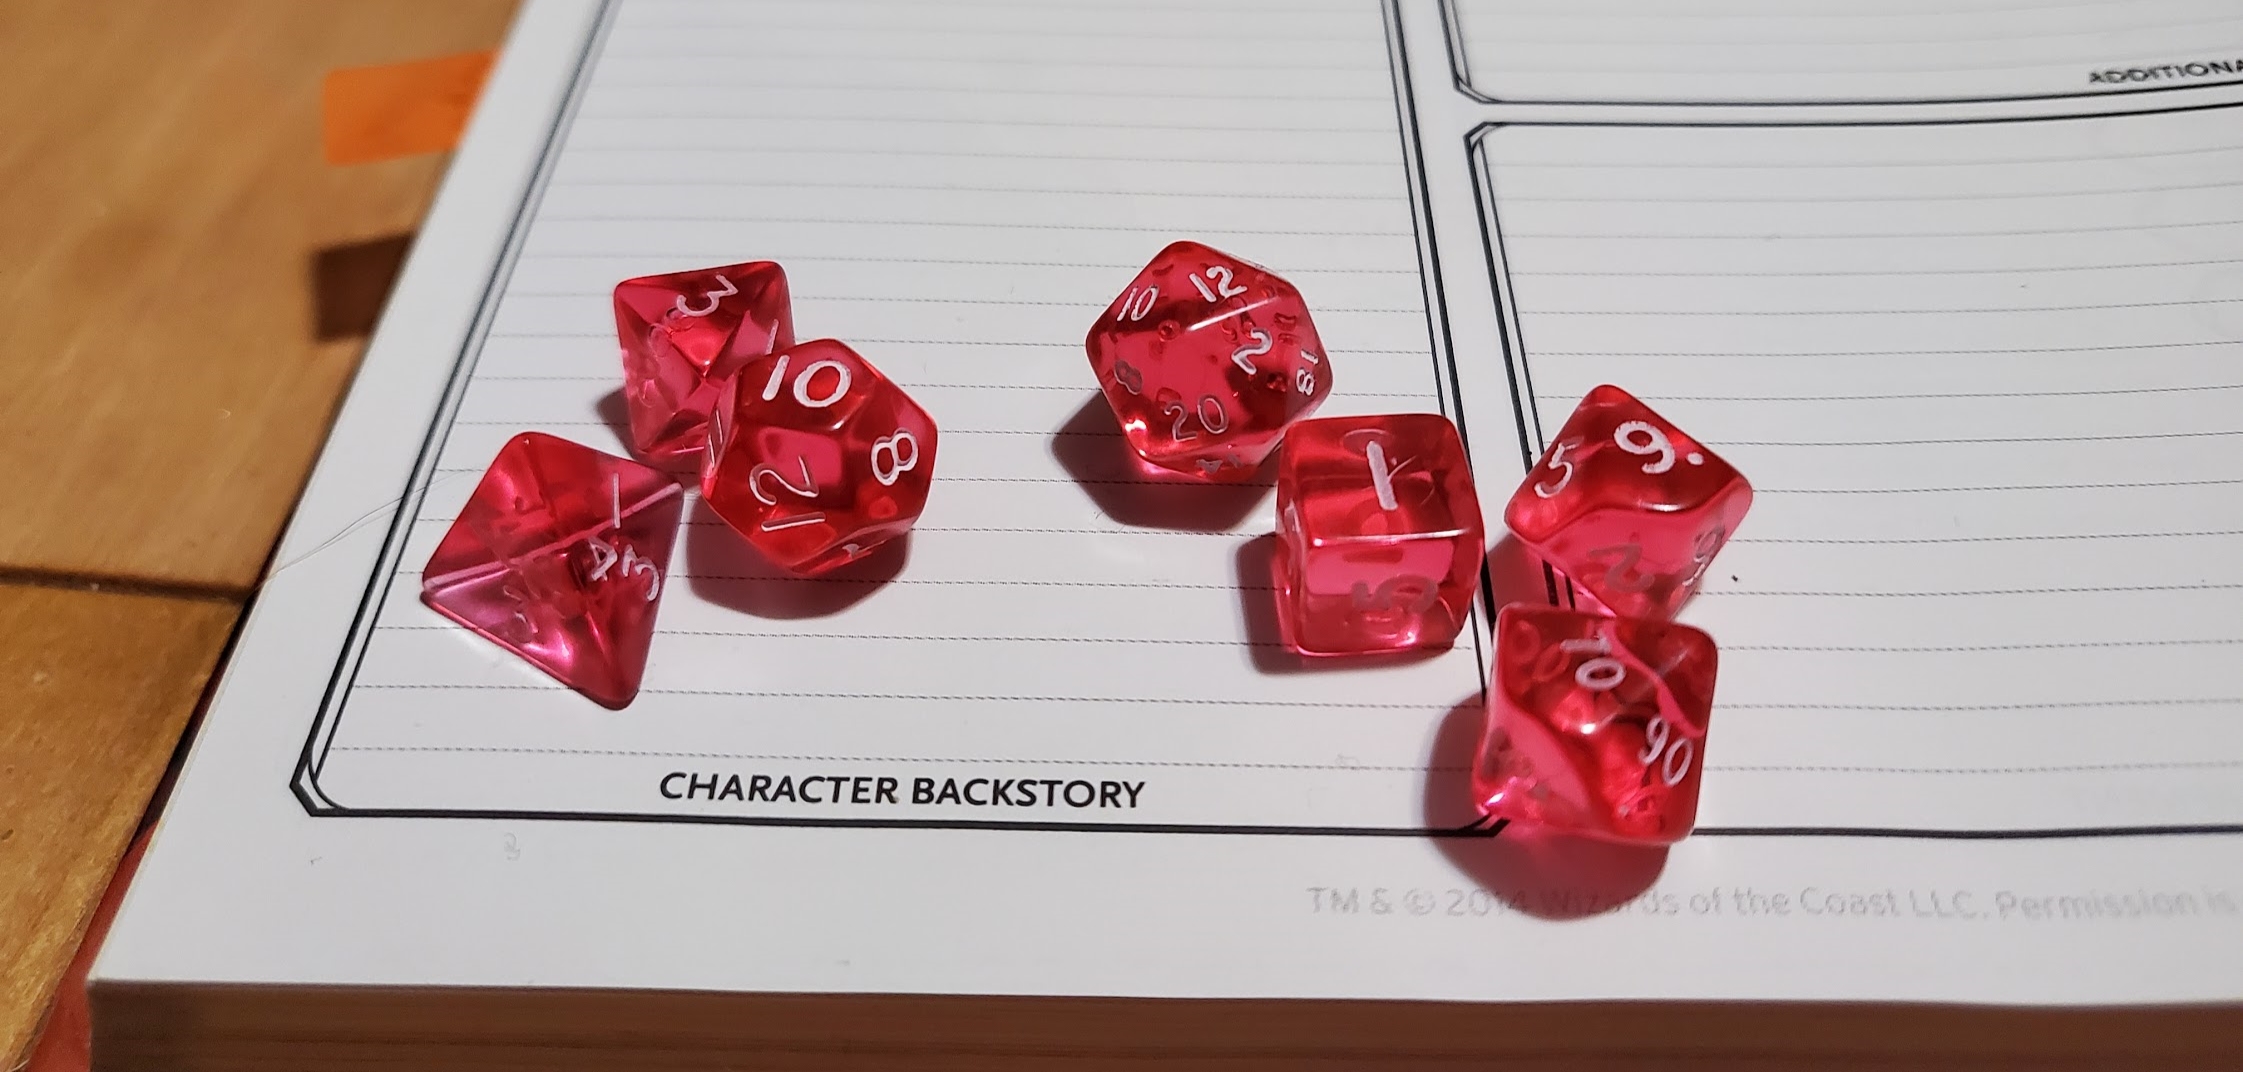 Character Backstory section of a Dungeons and Dragons character sheet.